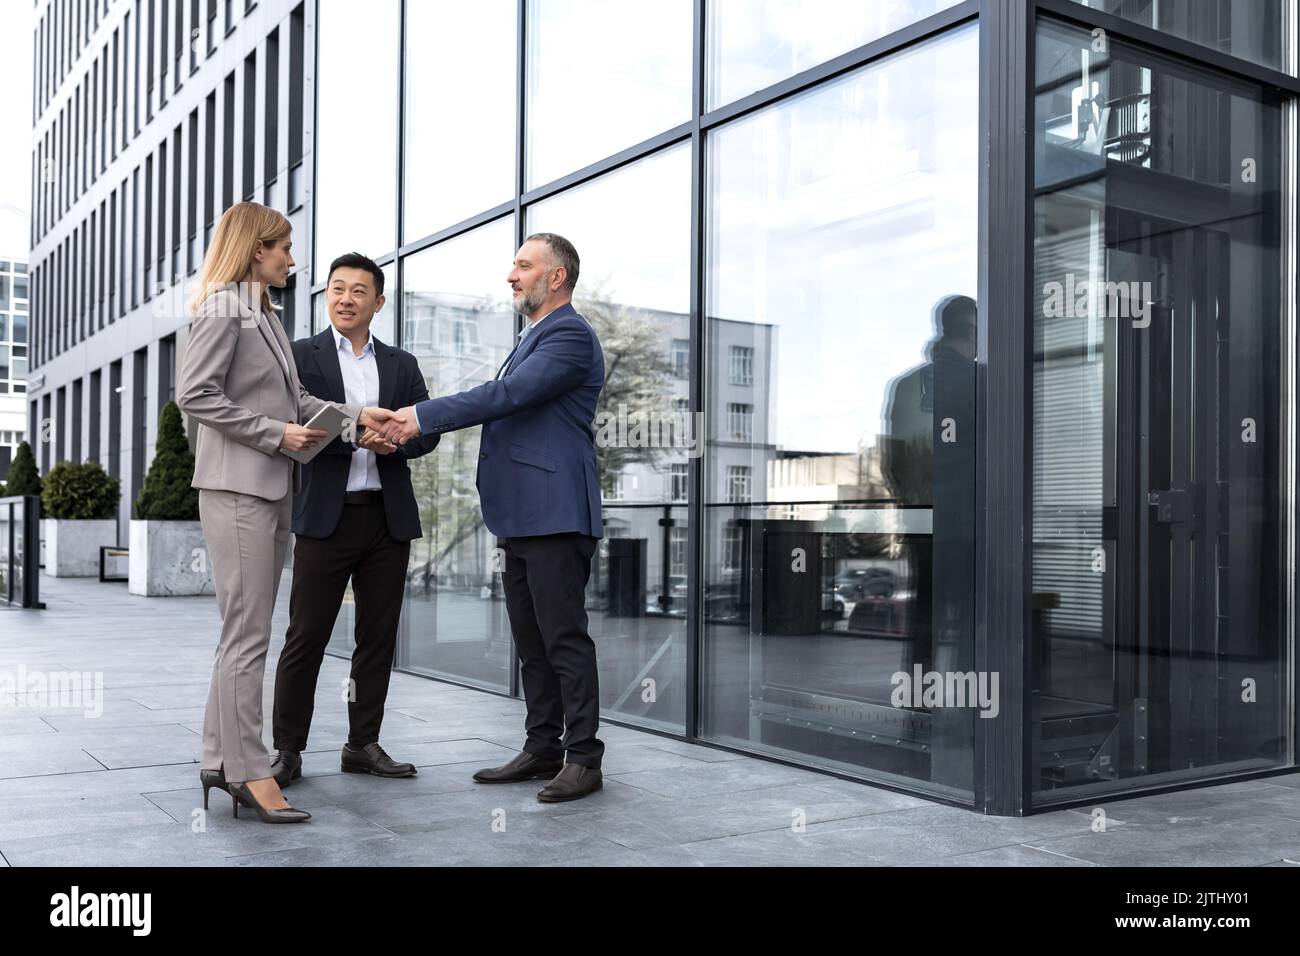 Meeting of three colleagues from outside the office building, experienced and mature IT specialists, greeting and shaking hands, business persons in business suits, diverse group of people Stock Photo